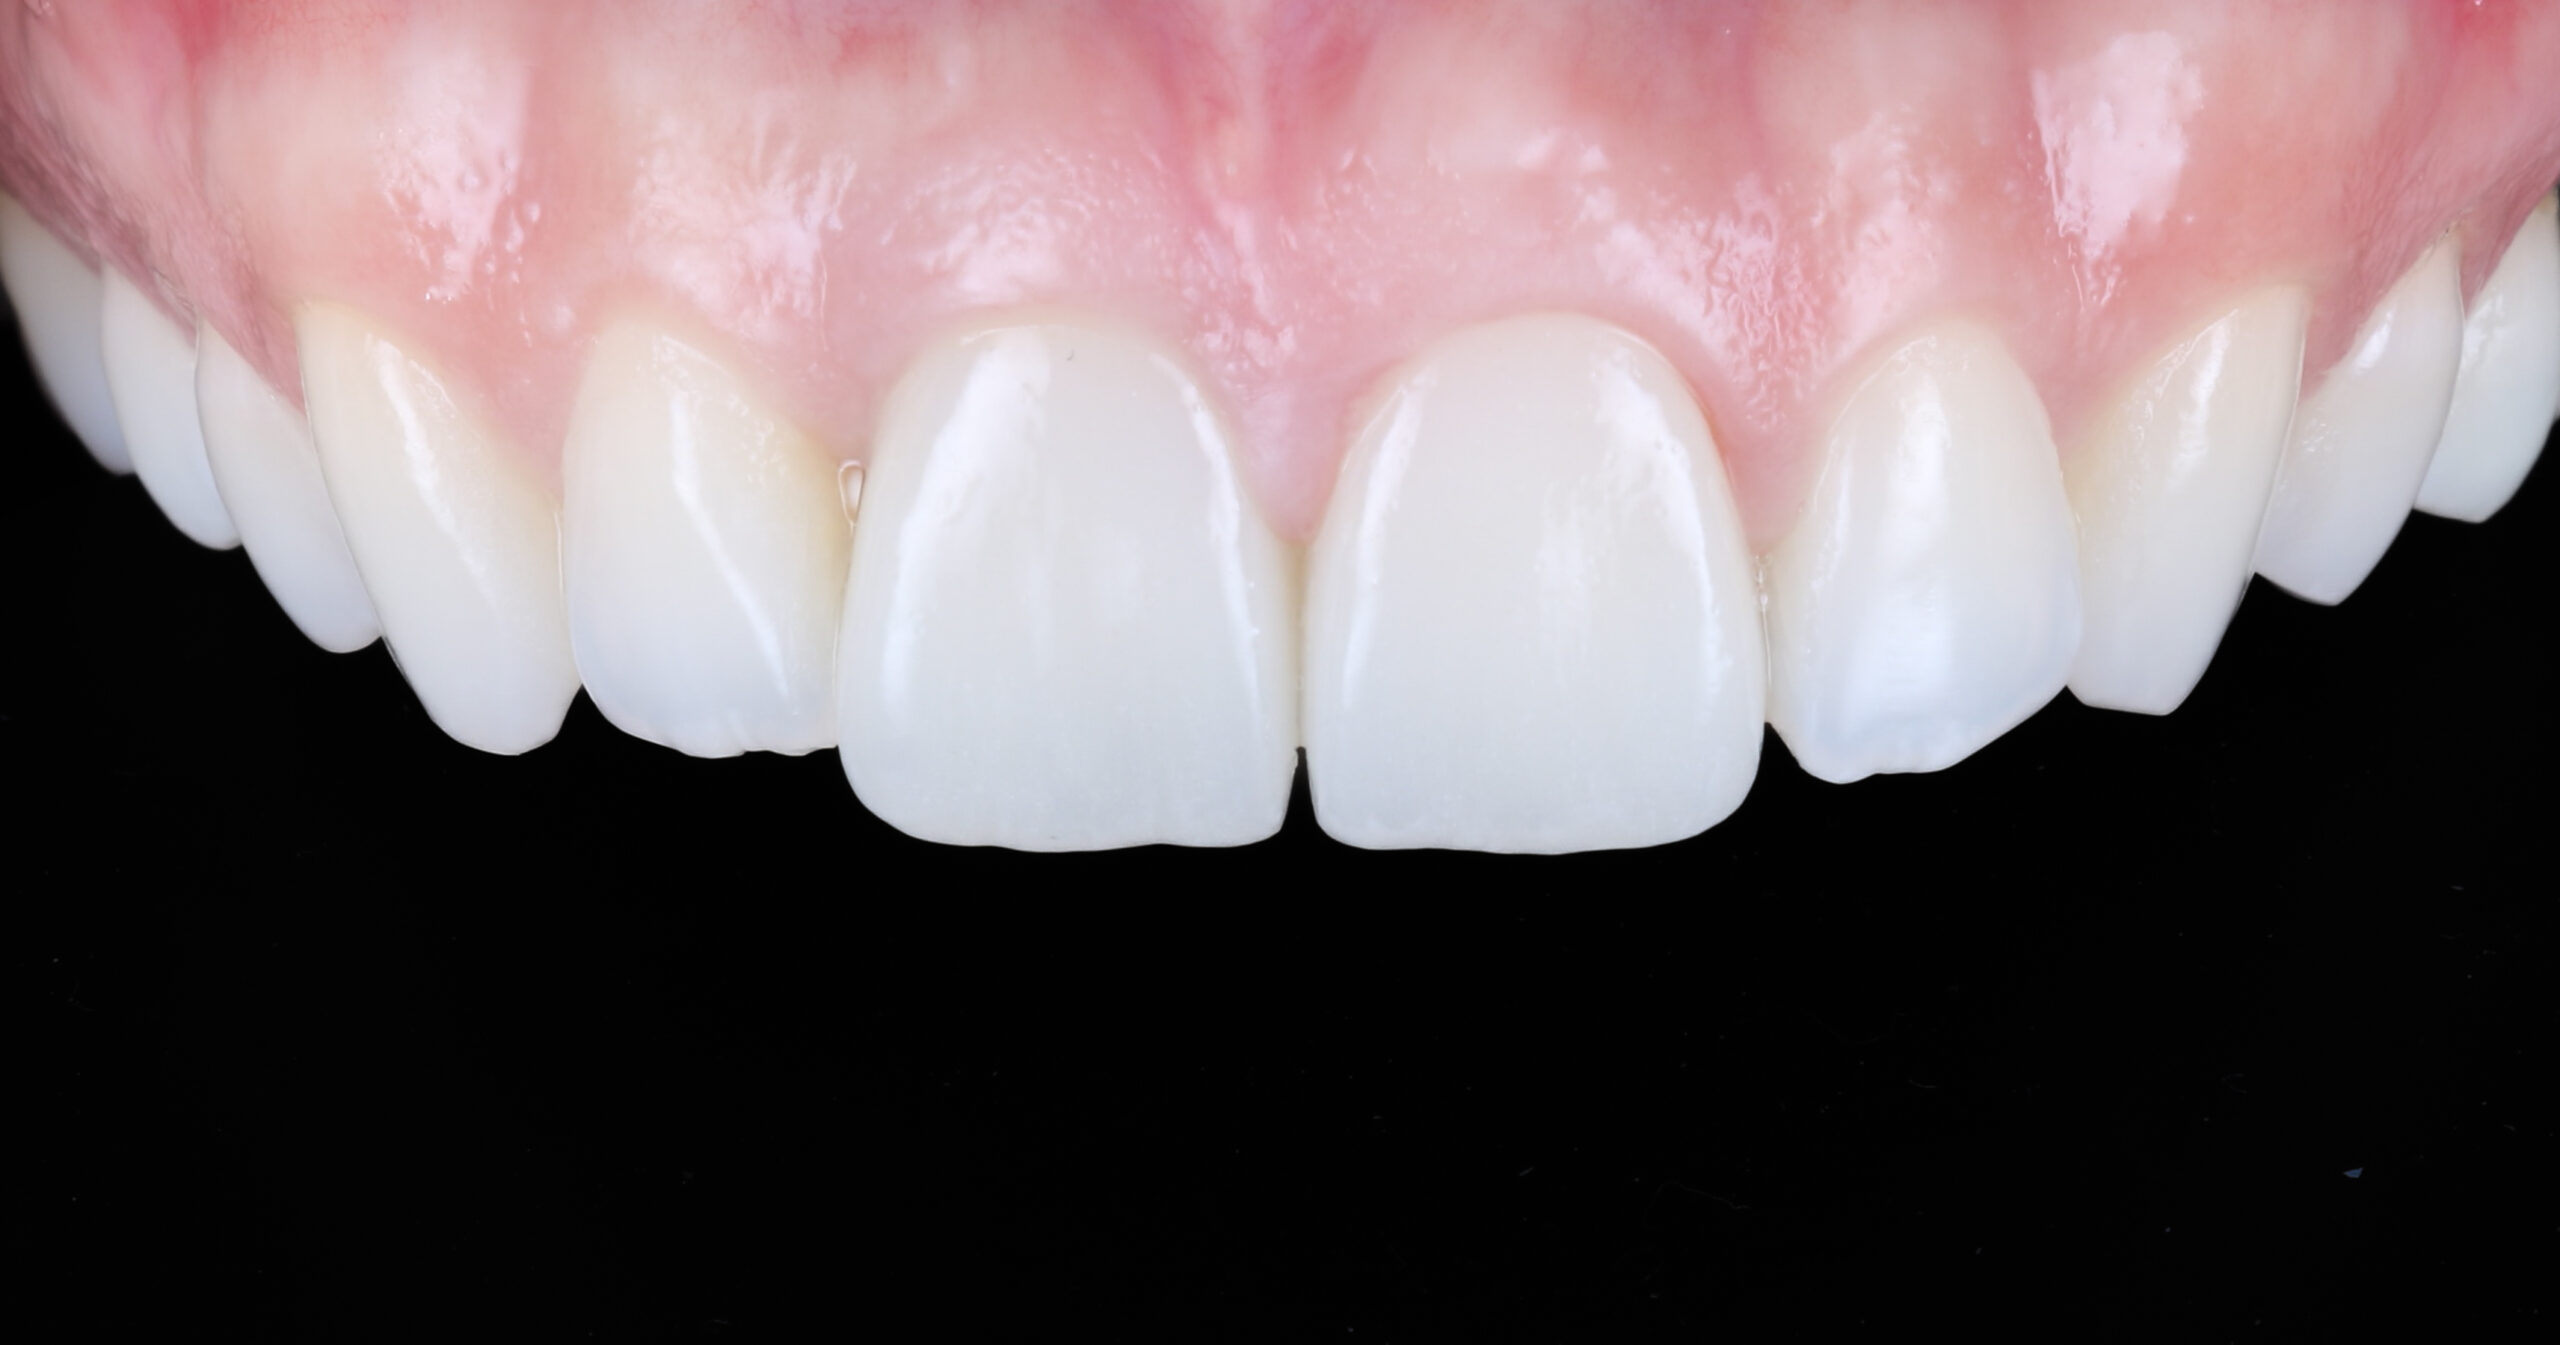 Porcelain Veneer And Implant Crown In The Esthetic Area